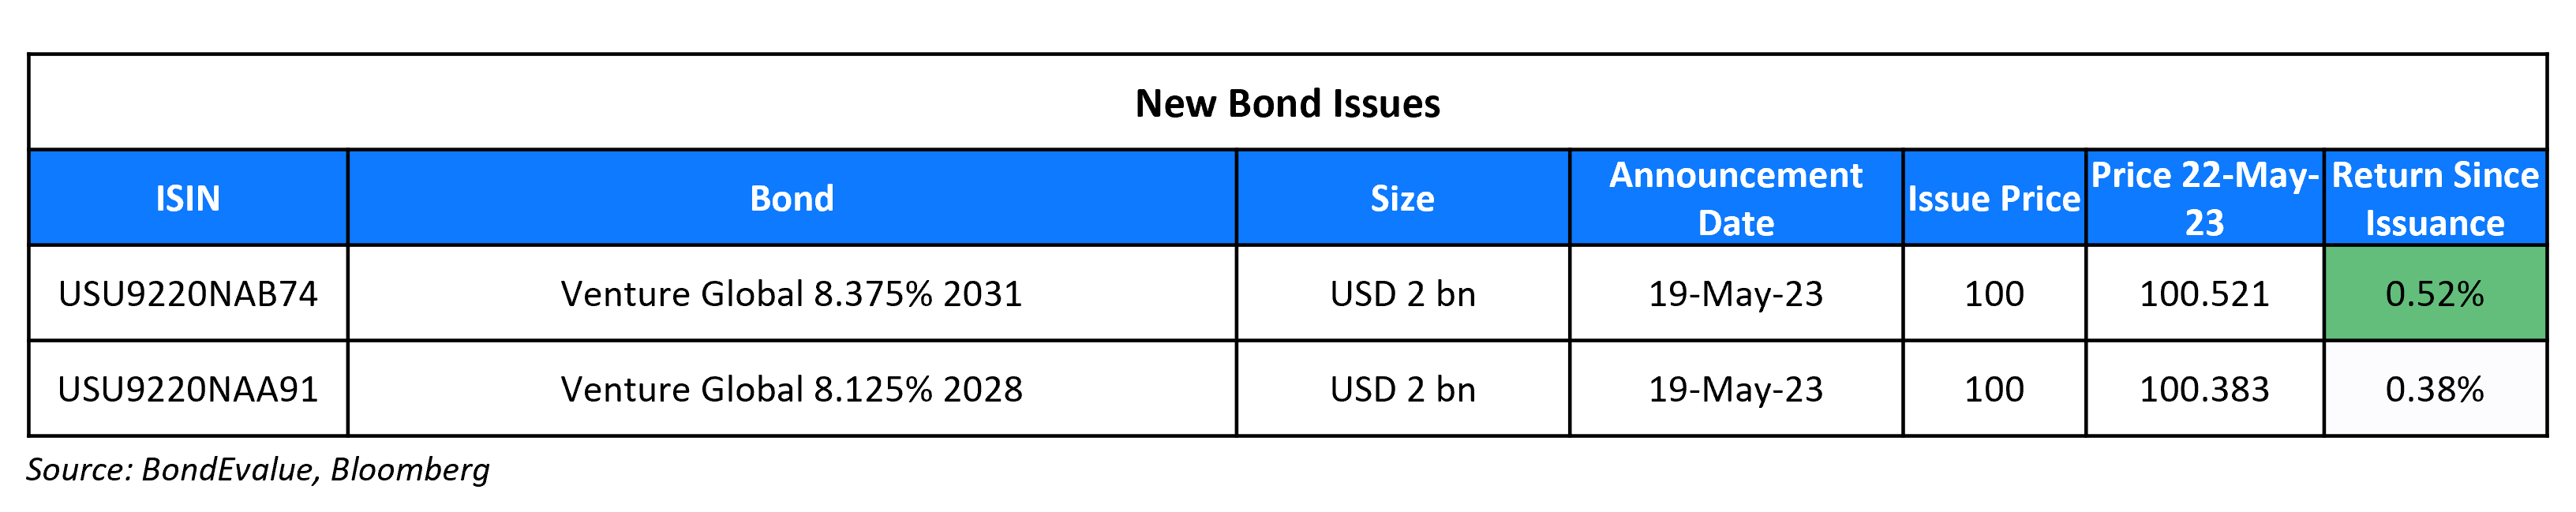 New Bond Issues 22 May 23